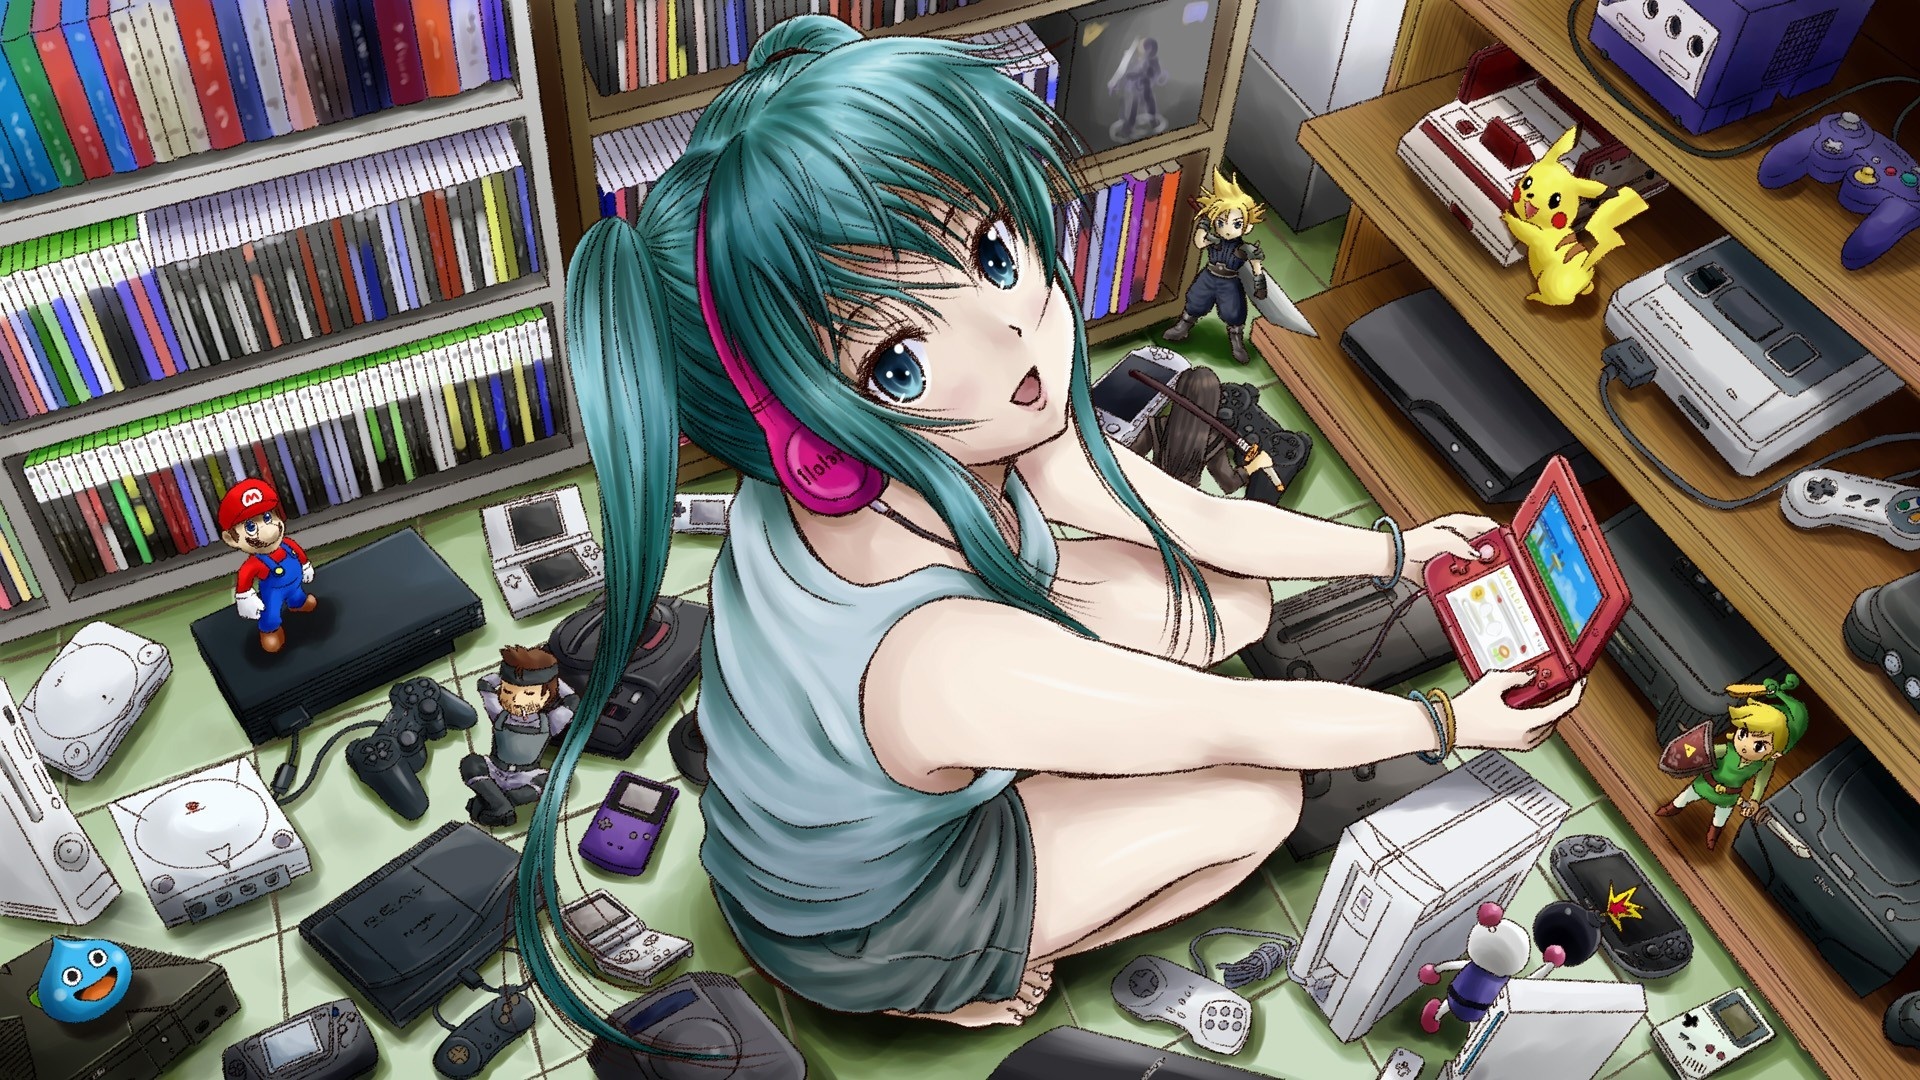 Gamer Girl, Anime style, Phone wallpapers, Cute and chic, 1920x1080 Full HD Desktop